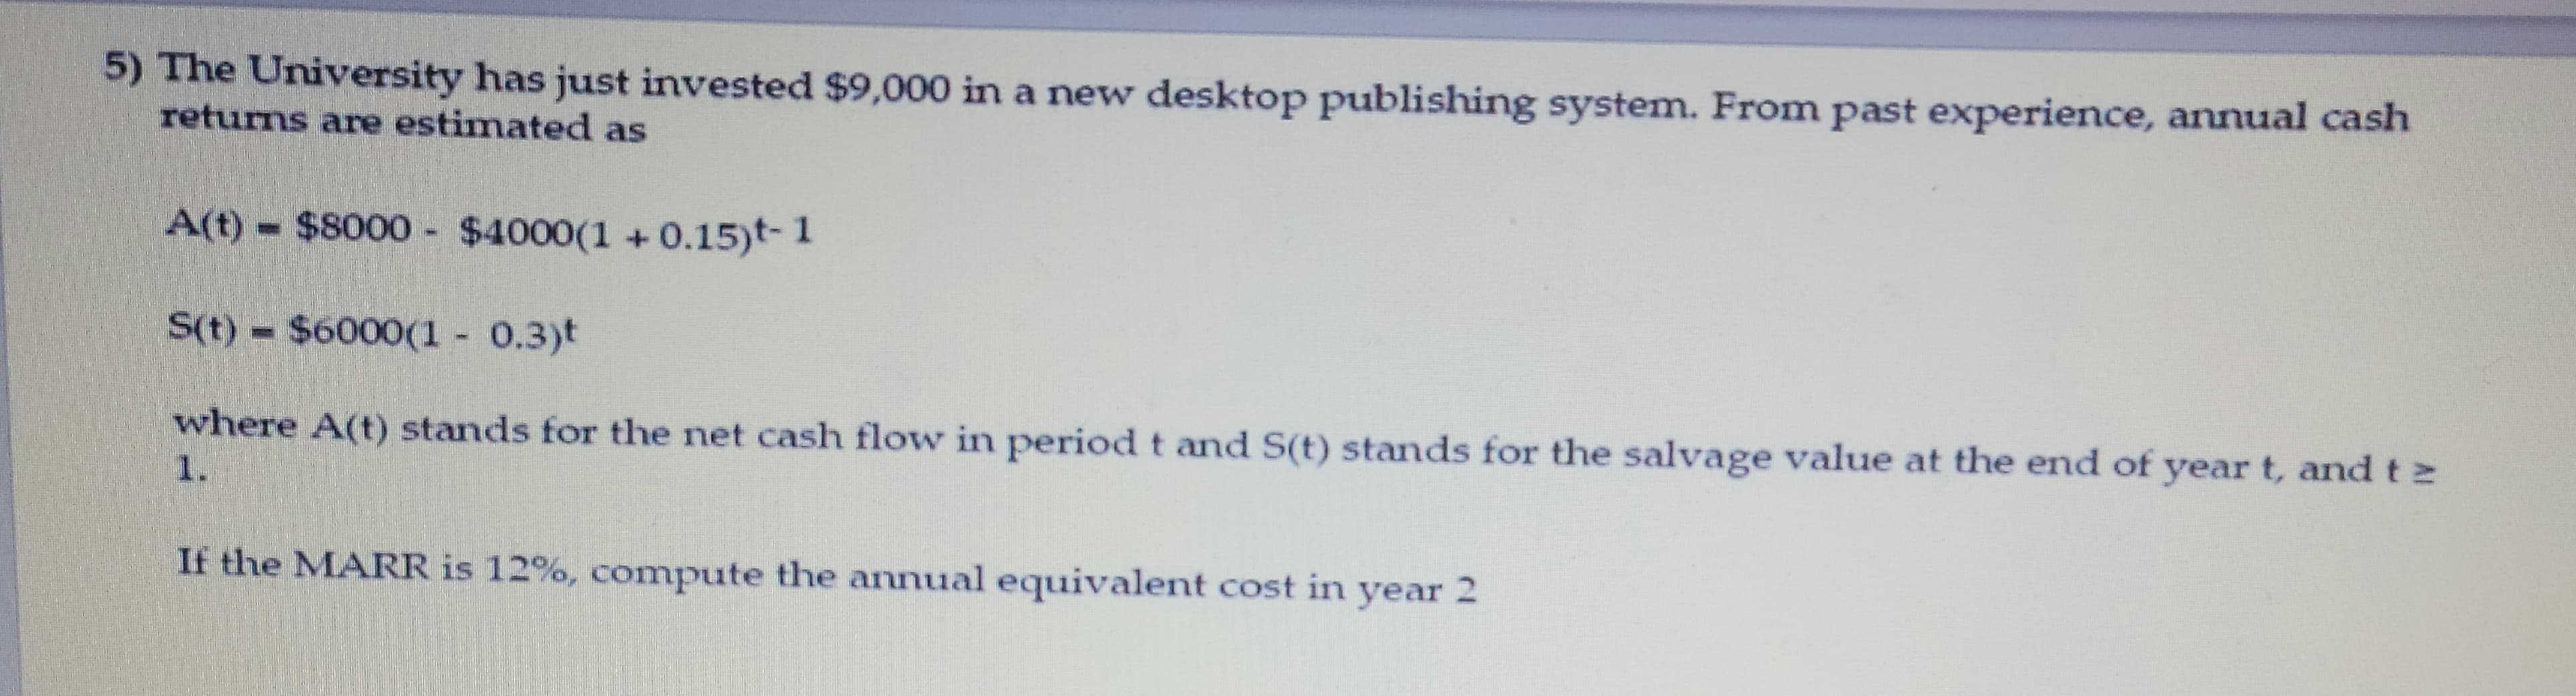 5) The University has just invested $9,000 in a new desktop publishing system. From past experience, annual cash
returns are estimated as
A(t) $8000 - $4000(1 + 0.15)t- 1
S(t) $6000(1 0.3)t
where A(t) stands for the net cash flow in period t and S(t) stands for the salvage value at the end of year t, and t 2
1.
If the MARR is 12%, compute the annual equivalent cost in year 2
